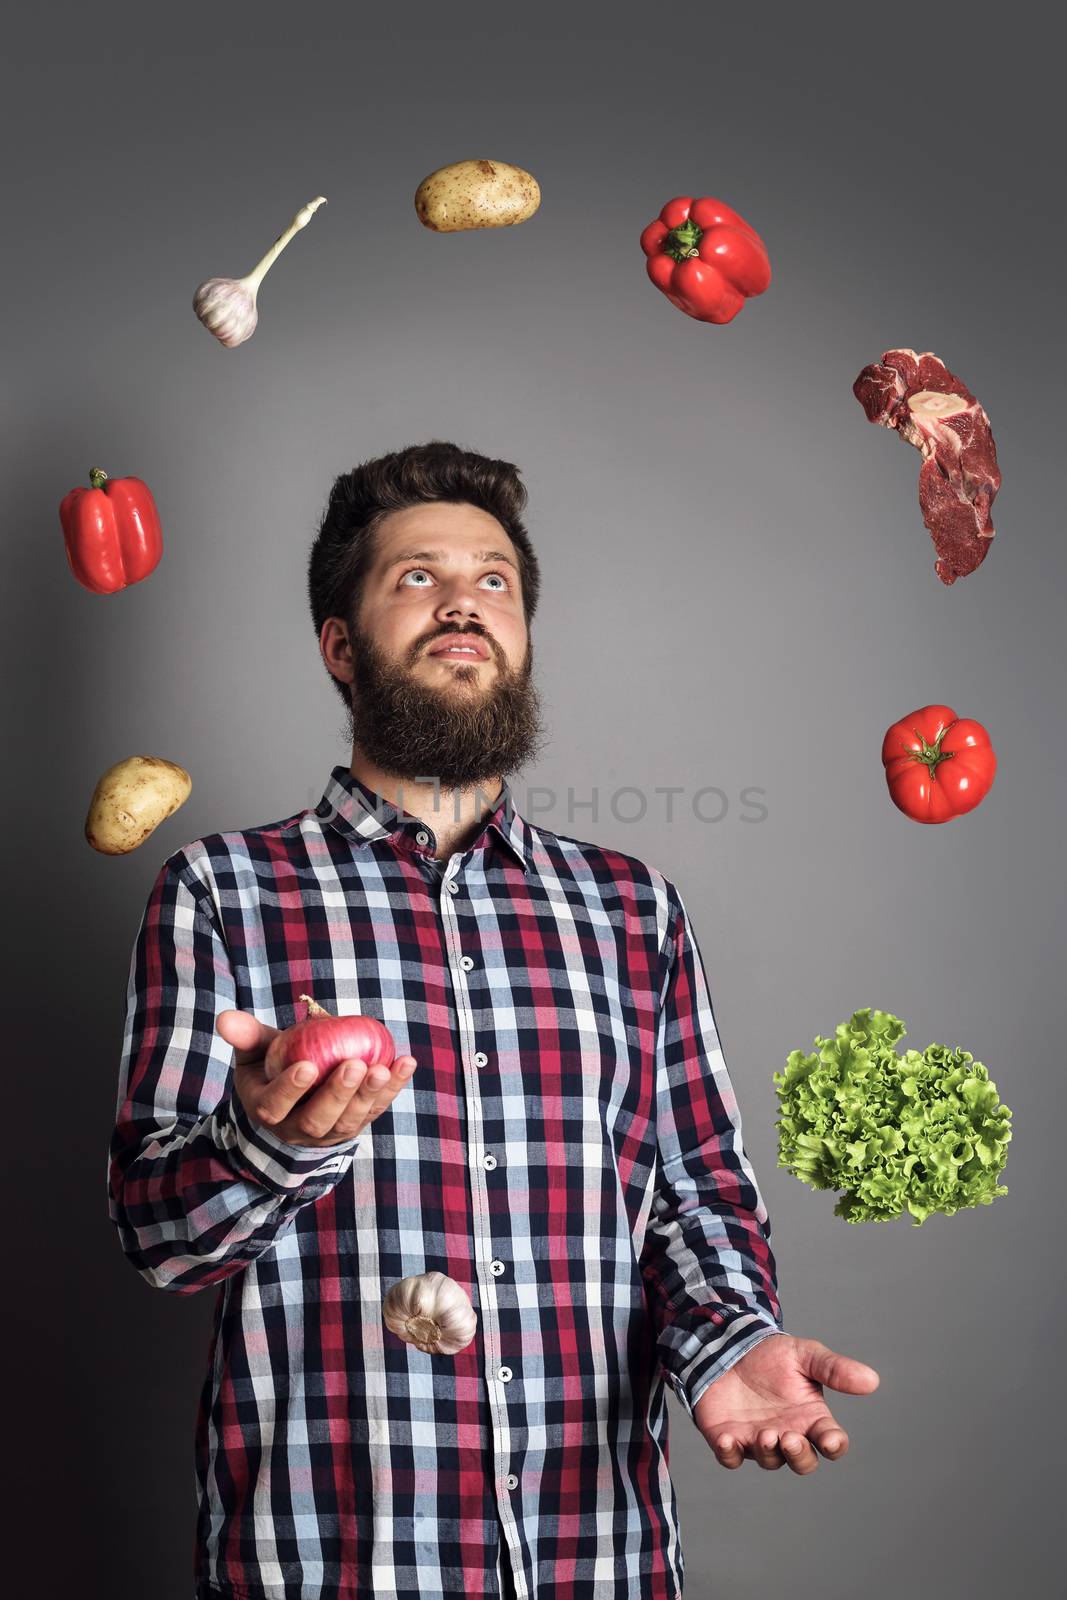 Cooking man concept, smiling bearded man in checked shirt, juggle meat and vegetables, studio shot on gray background